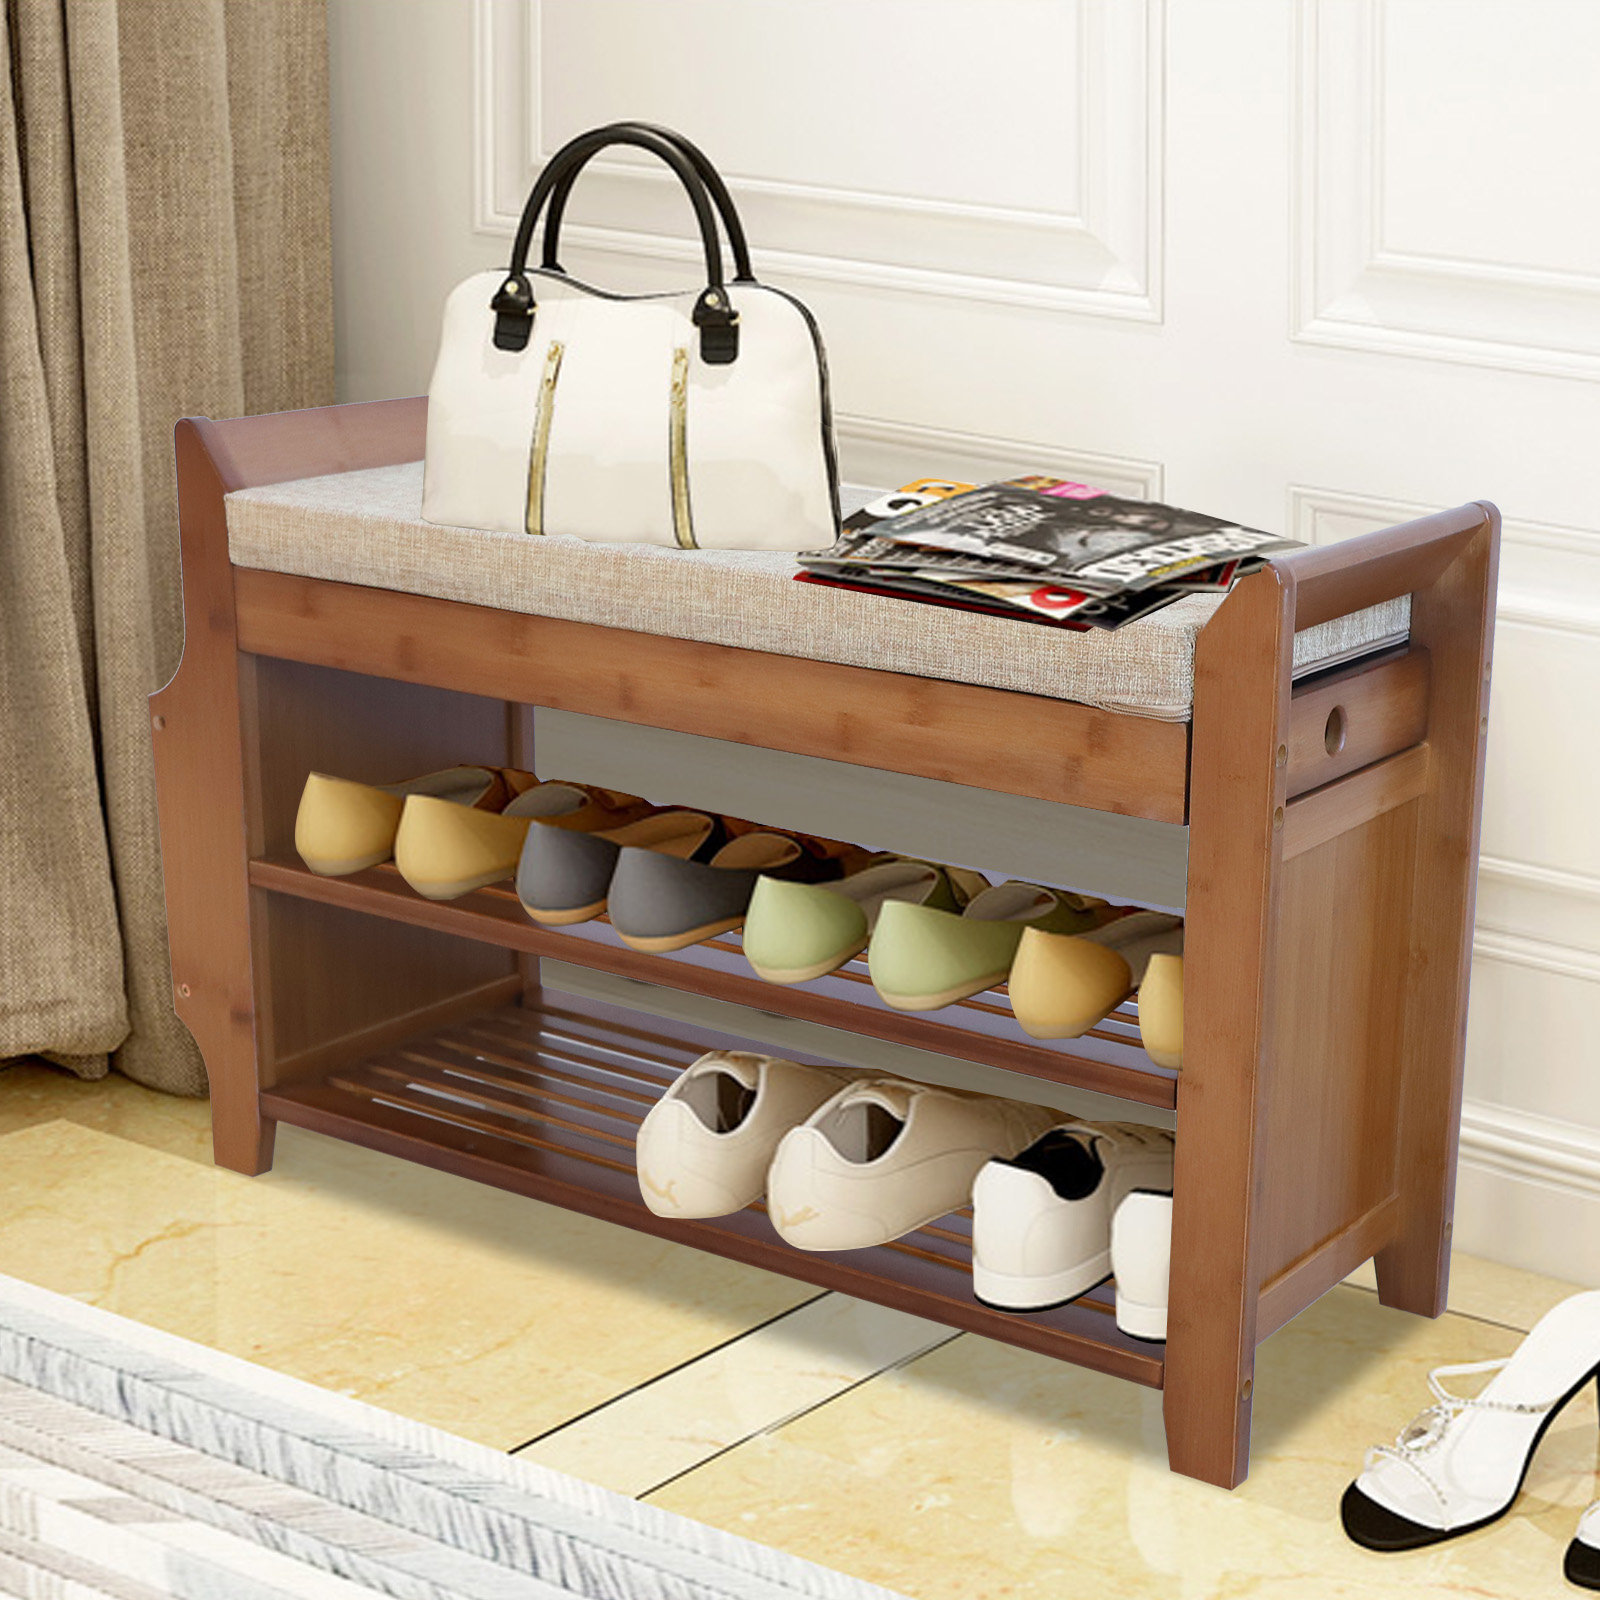 3-Tier Wood Shoe Rack with Soft Seat